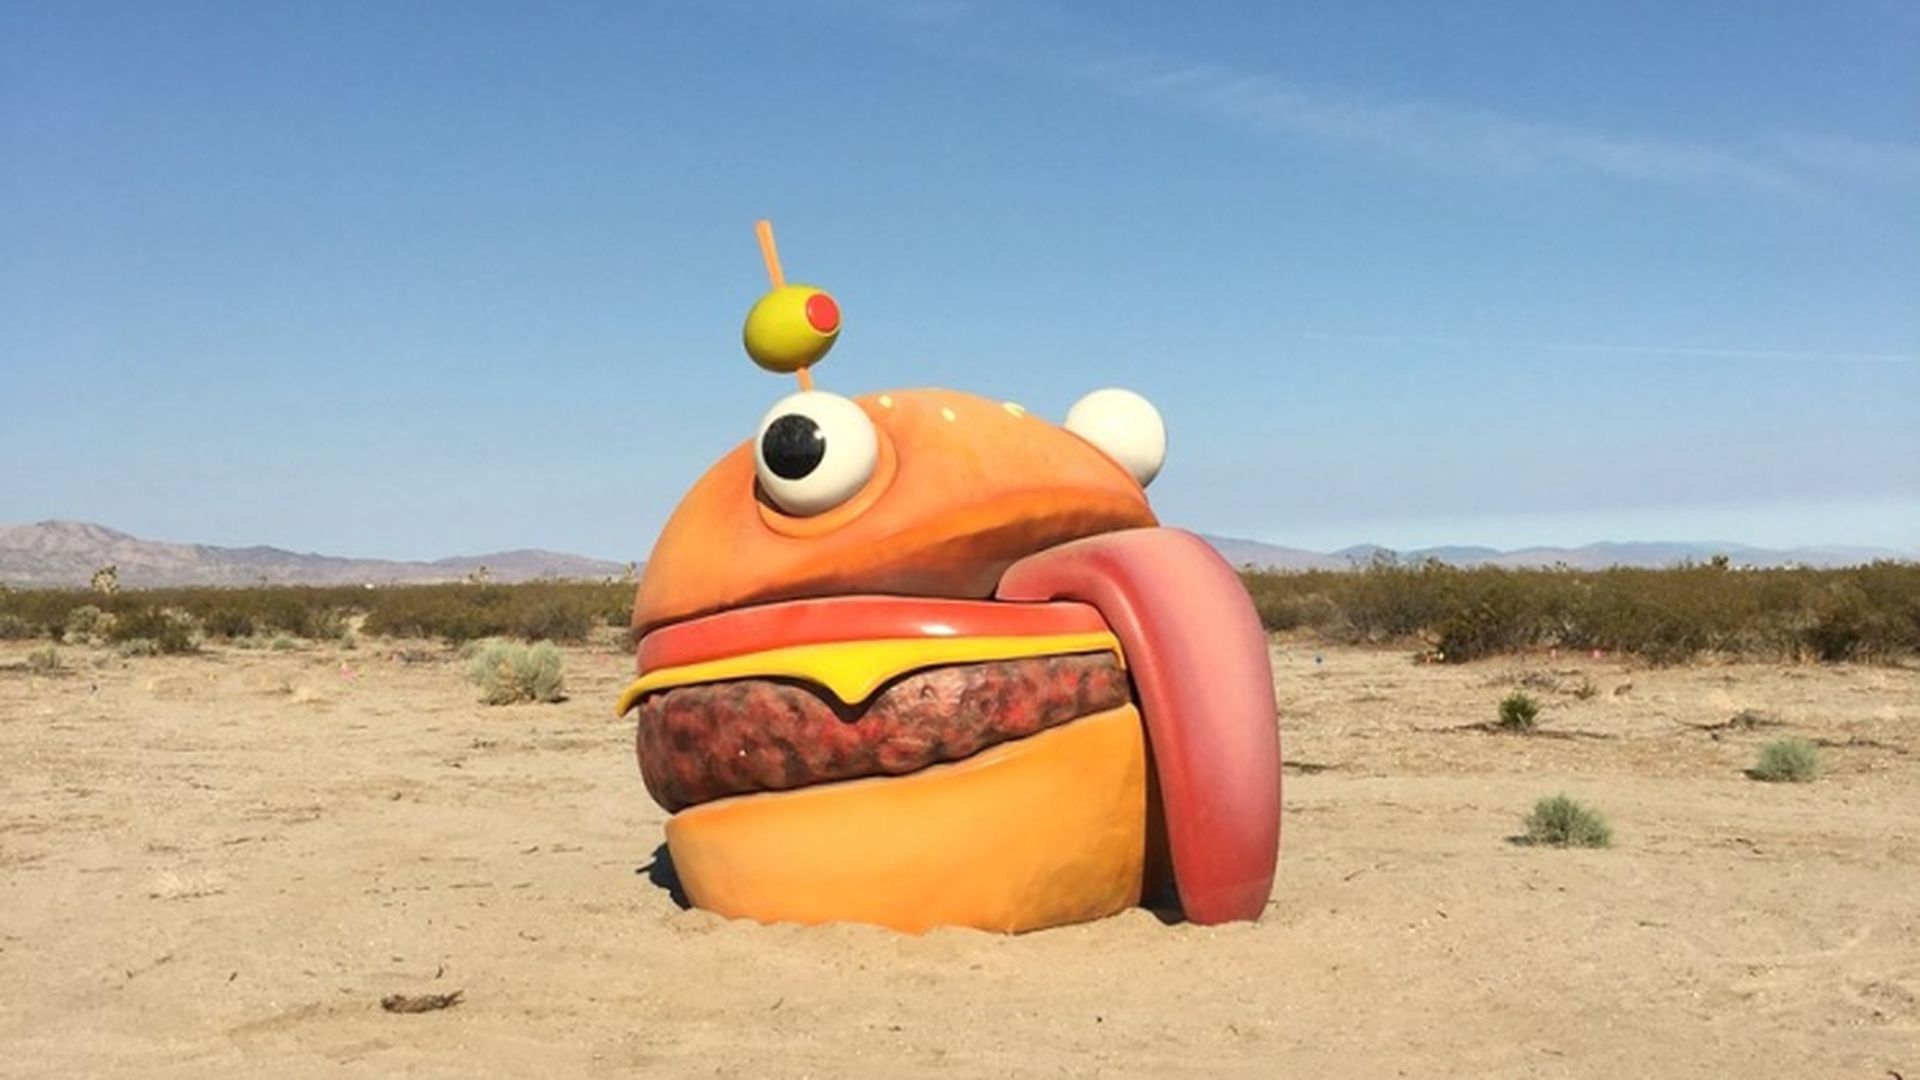 Fortnite invades real world, Durr Burger turns up in the middle of the desert